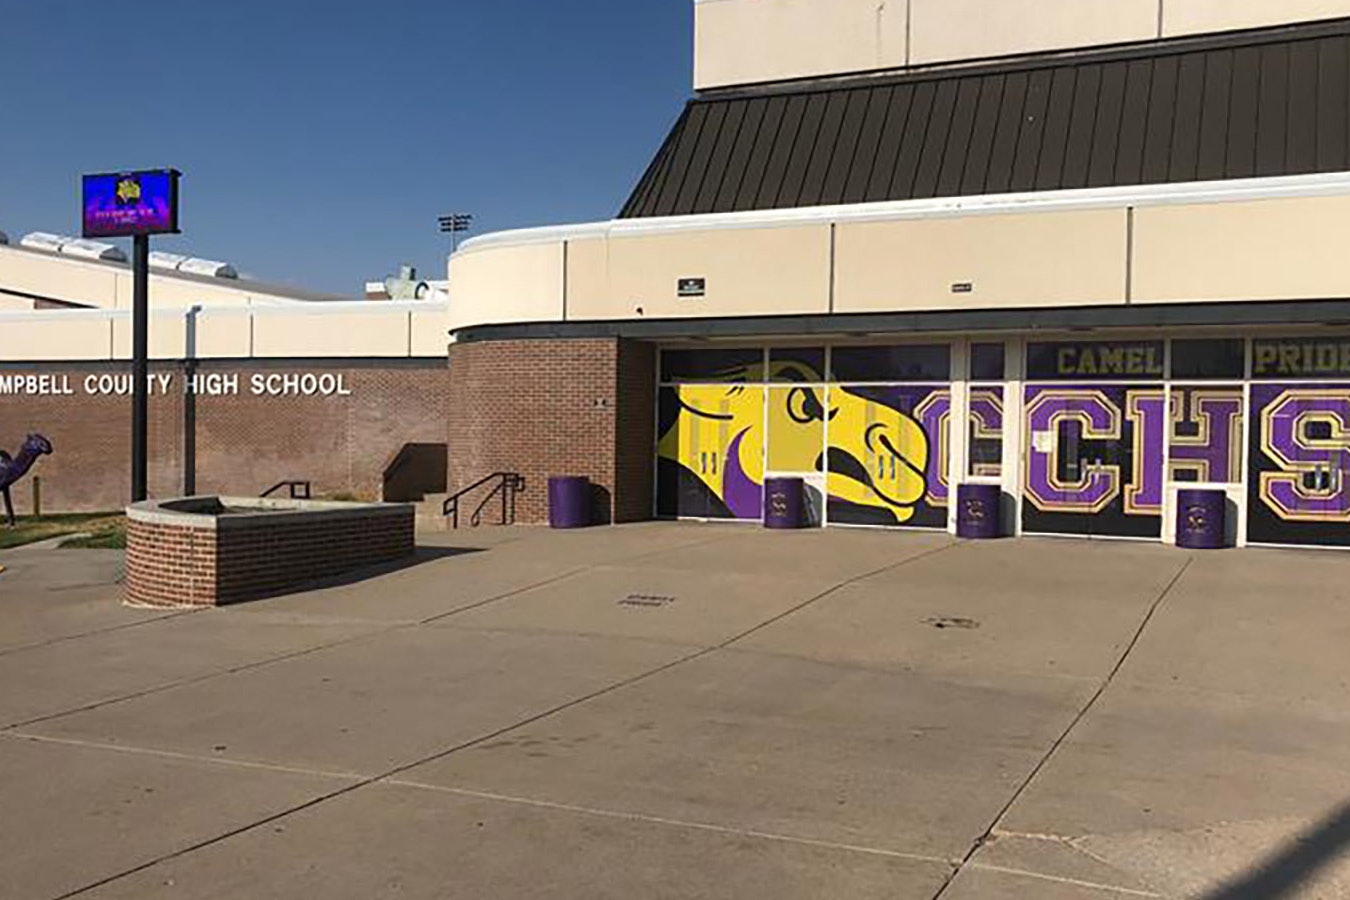 Campbell County High School in Gillette, Wyoming.